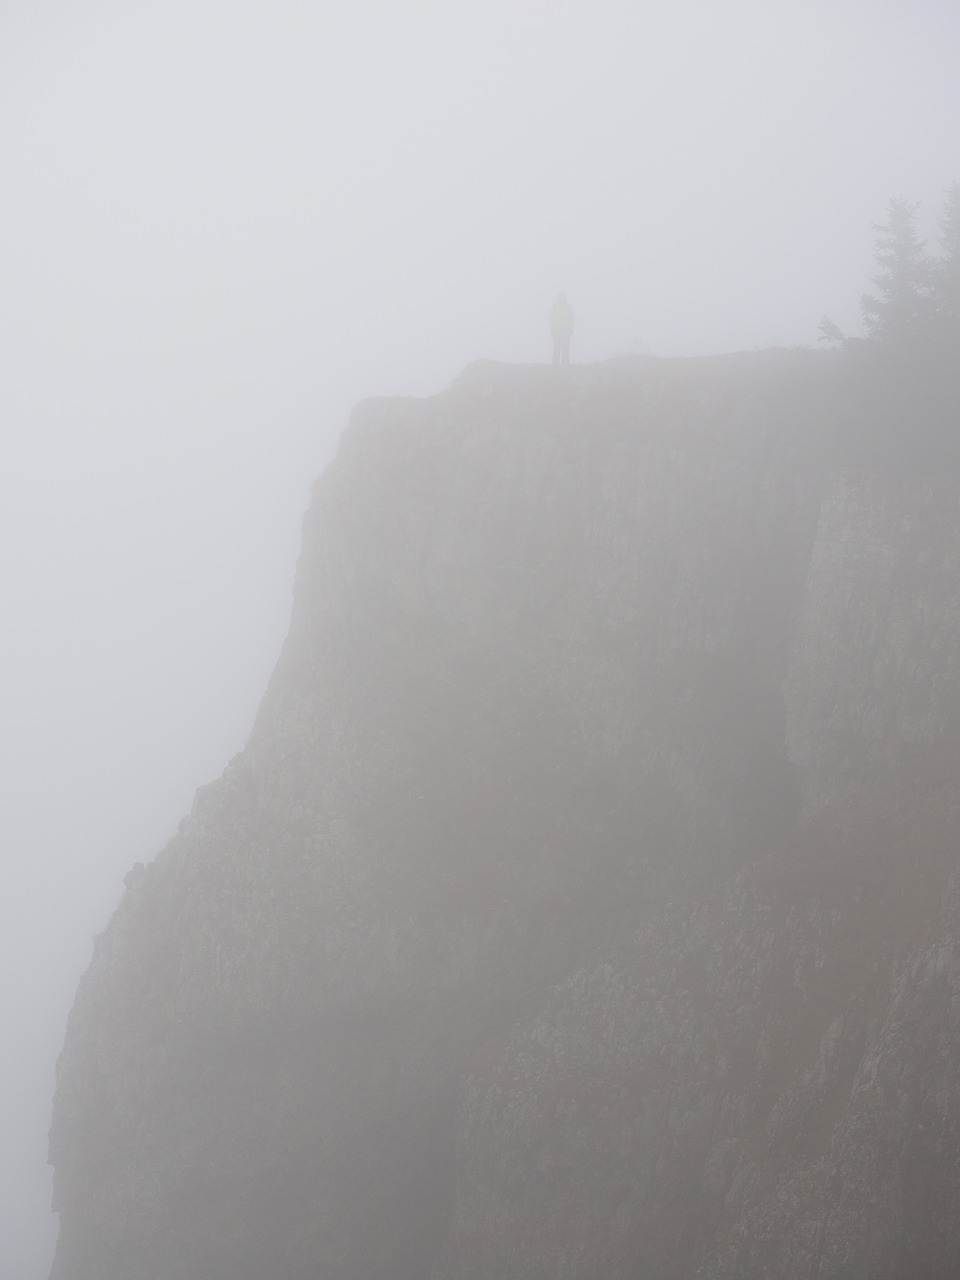 rock fog abyss free photo